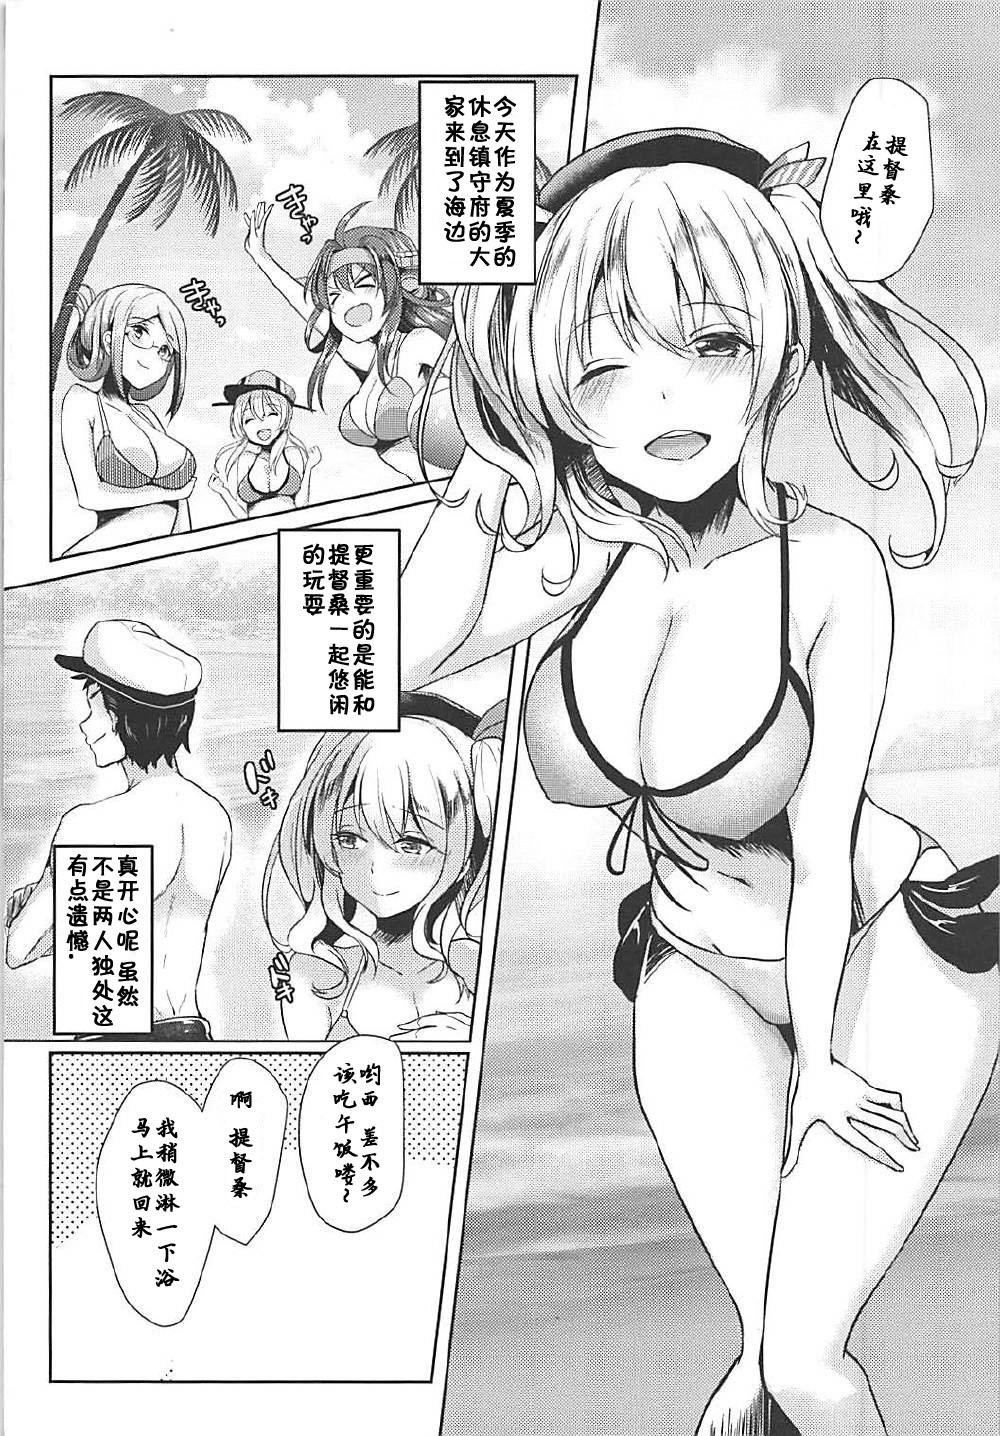 Polla Shower Room ni Gochuui o - Shower Room Please Note - Kantai collection Pegging - Page 3